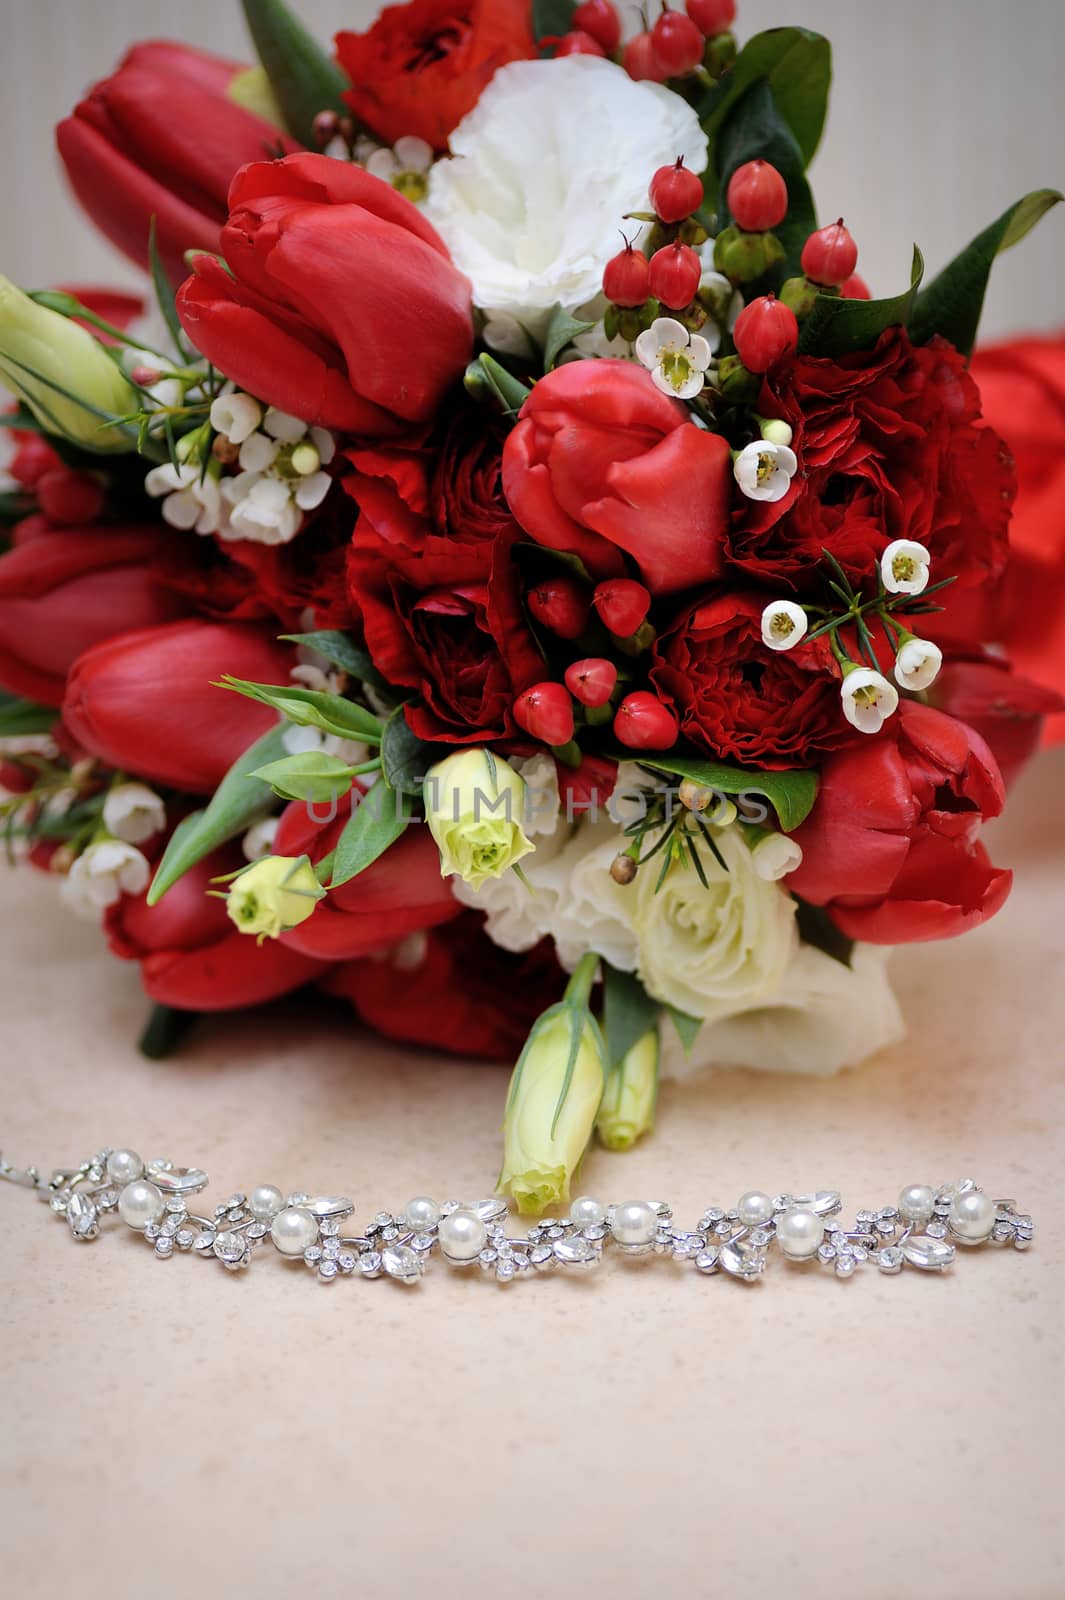 beautiful wedding bouquet and necklace on the table.